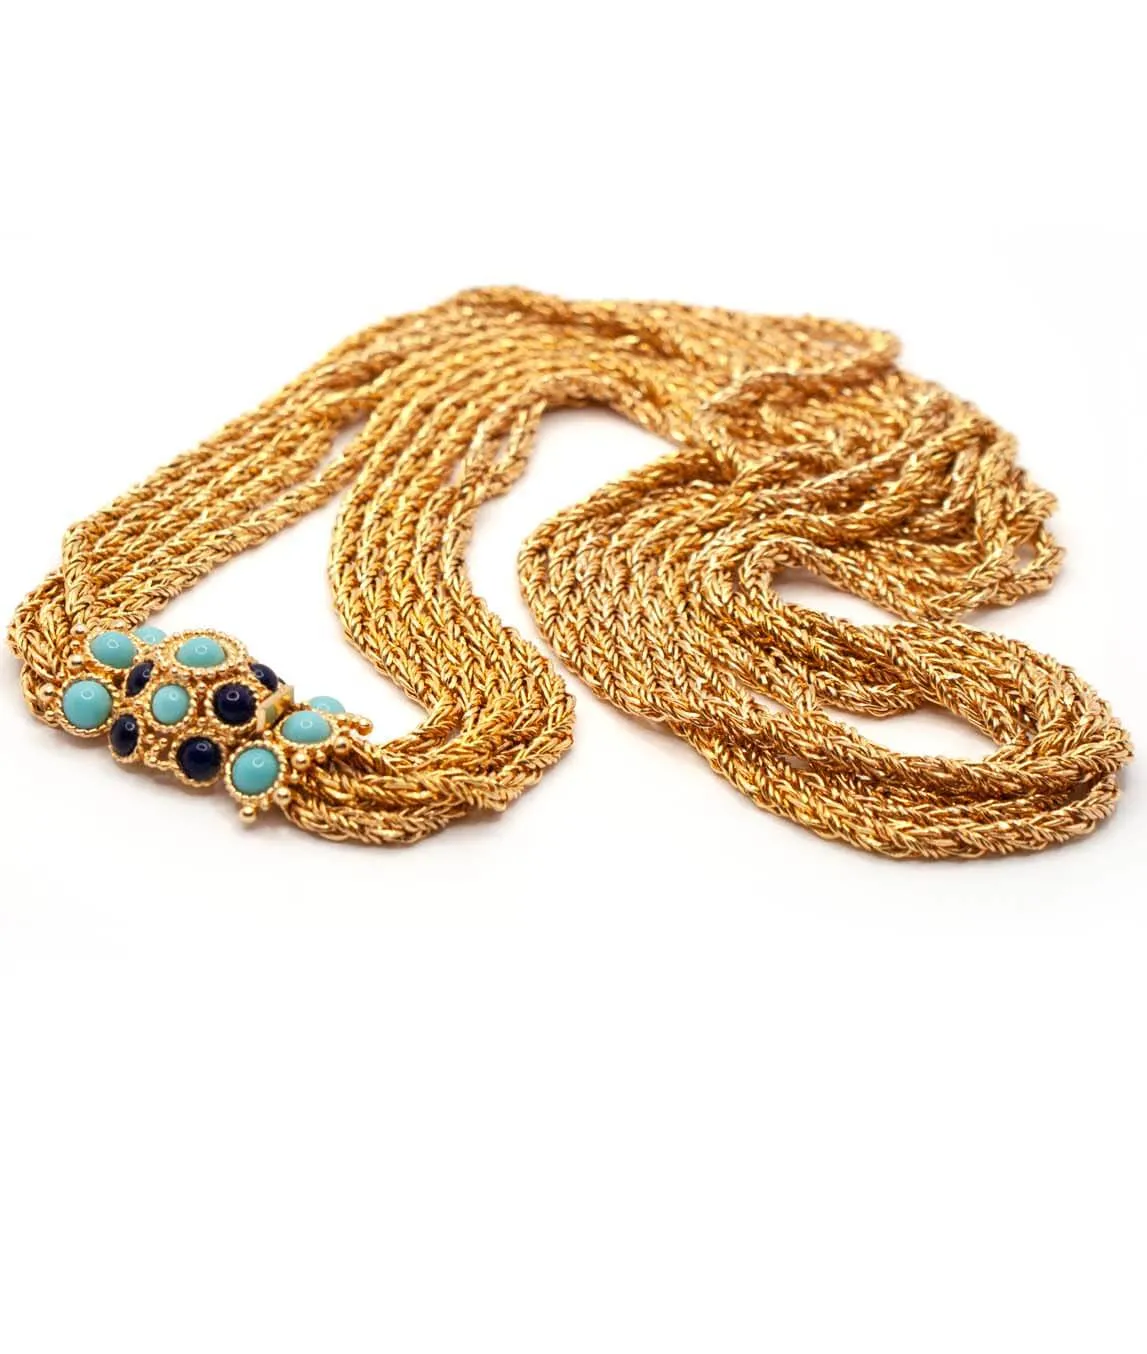 Christian Dior five chain necklace with turquoise and blue glass decorative clasp from 1969